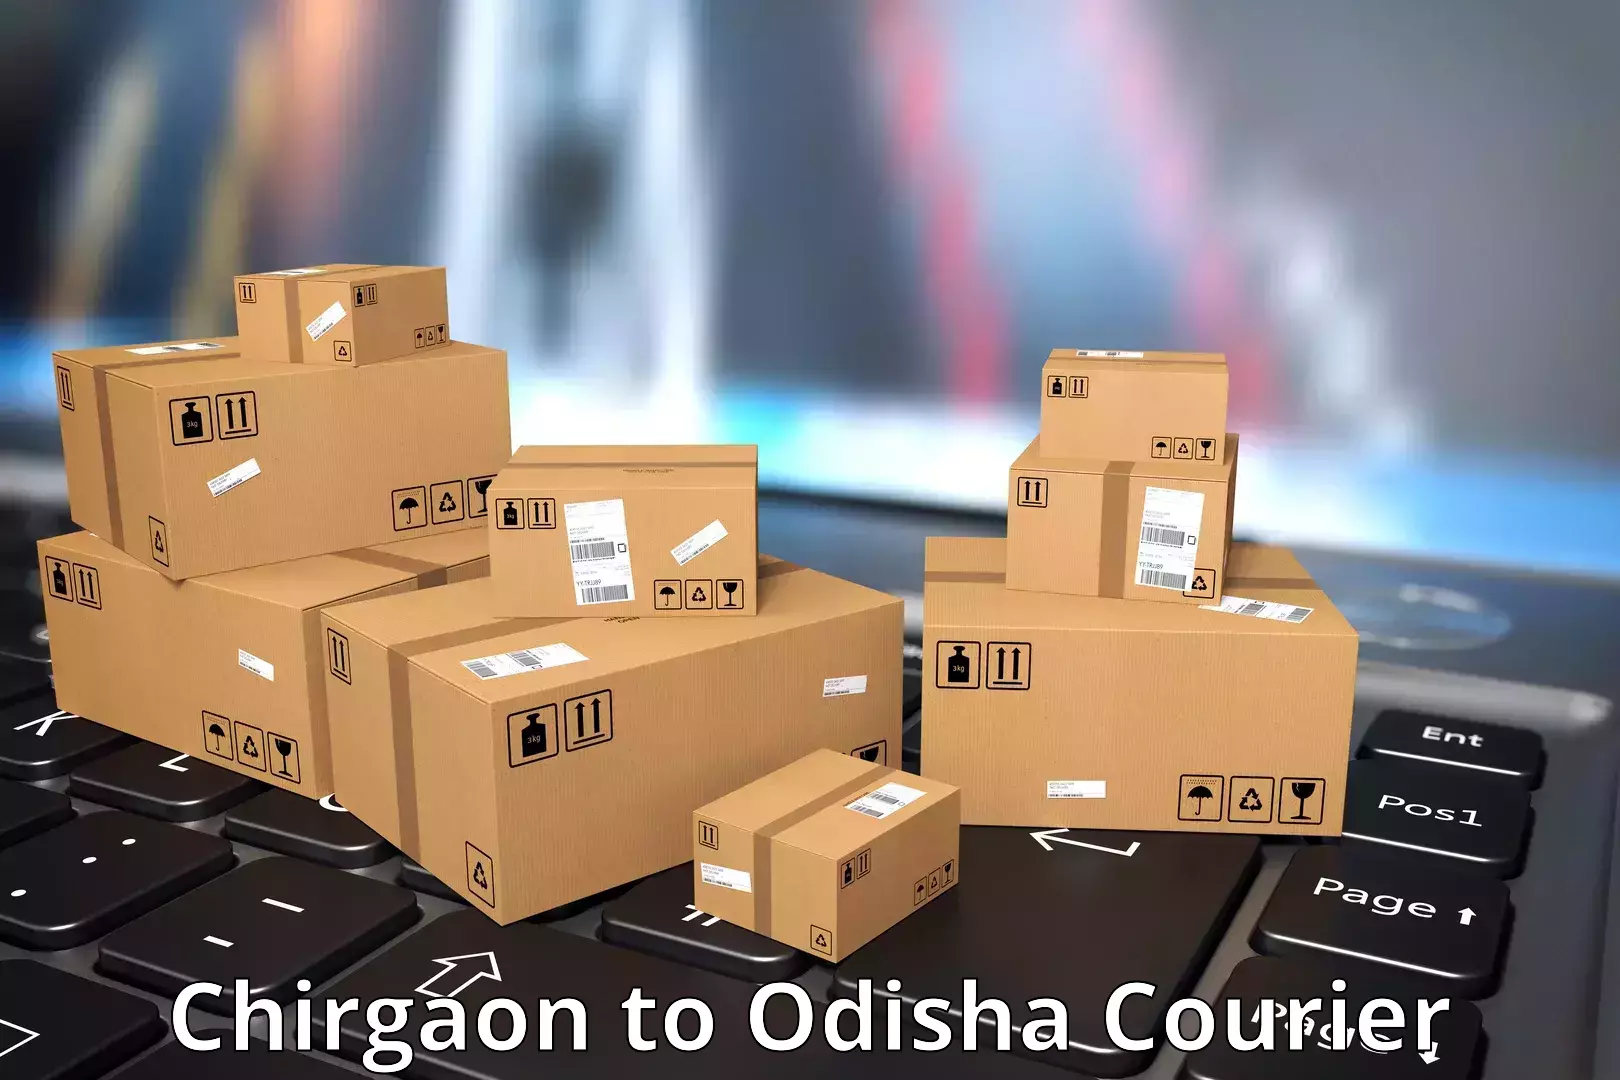 Reliable parcel services Chirgaon to Odisha